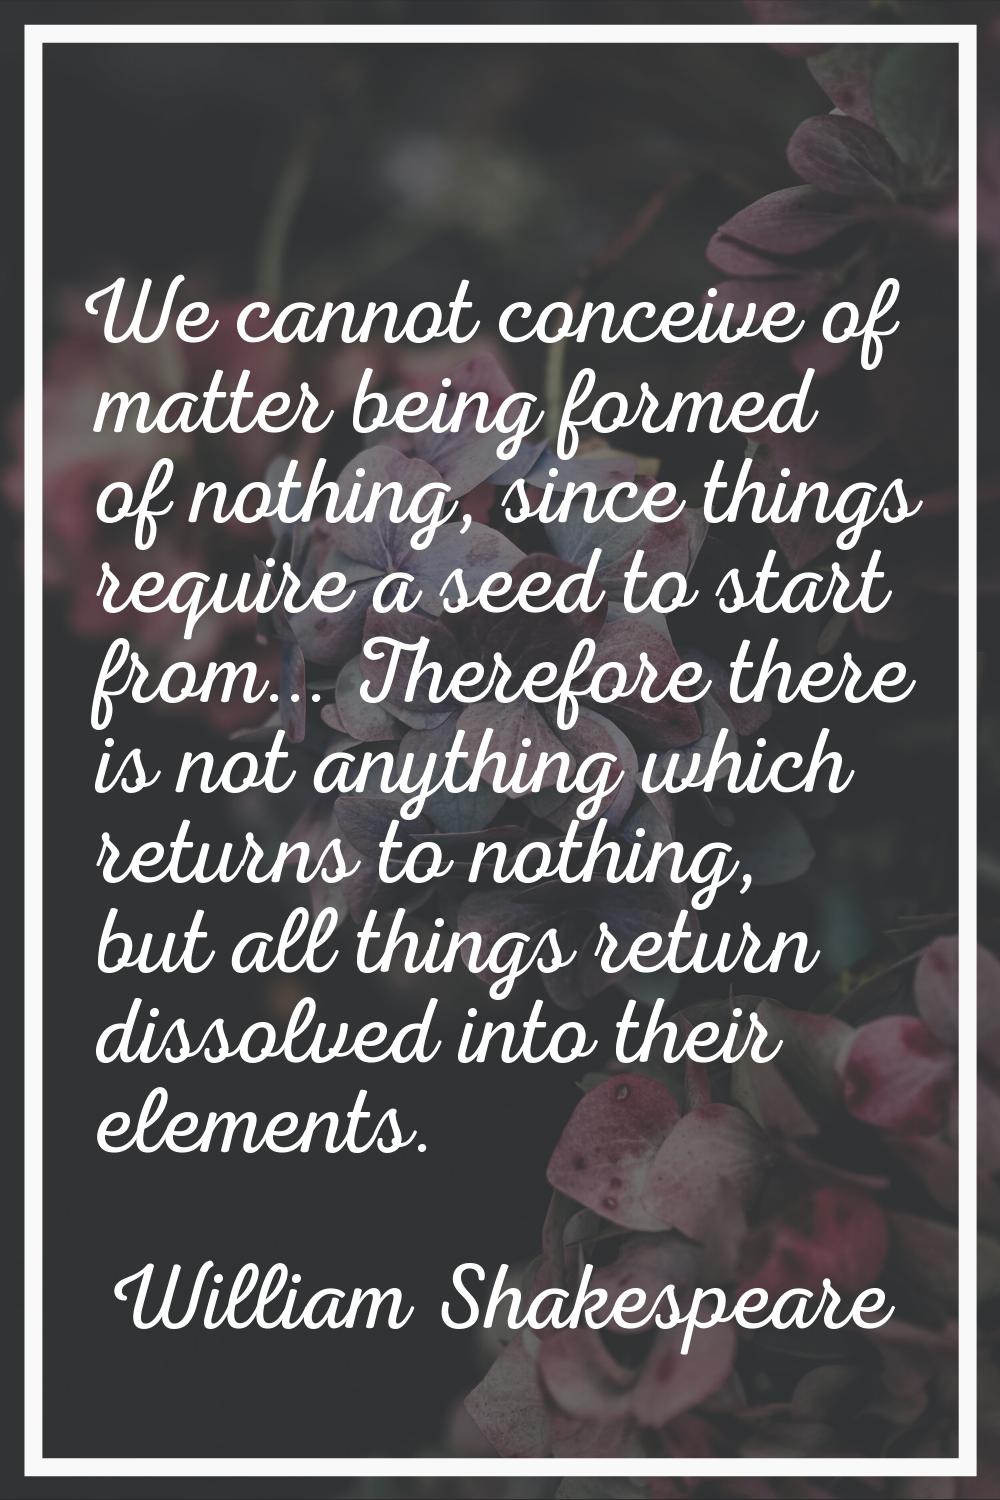 We cannot conceive of matter being formed of nothing, since things require a seed to start from... 